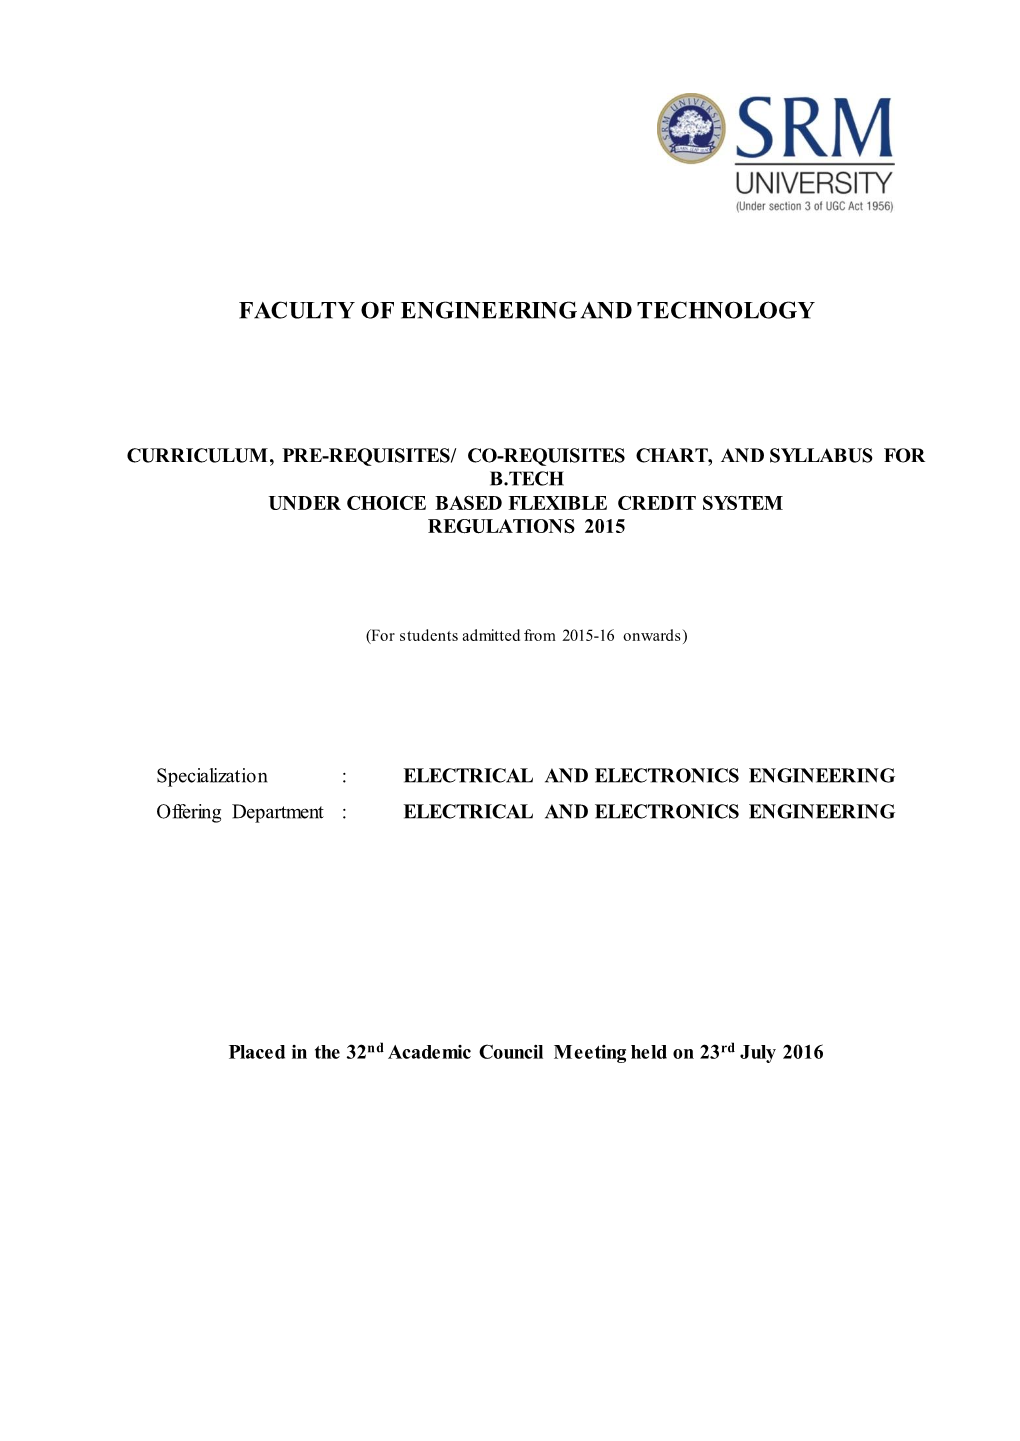 B.Tech Under Choice Based Flexible Credit System Regulations 2015